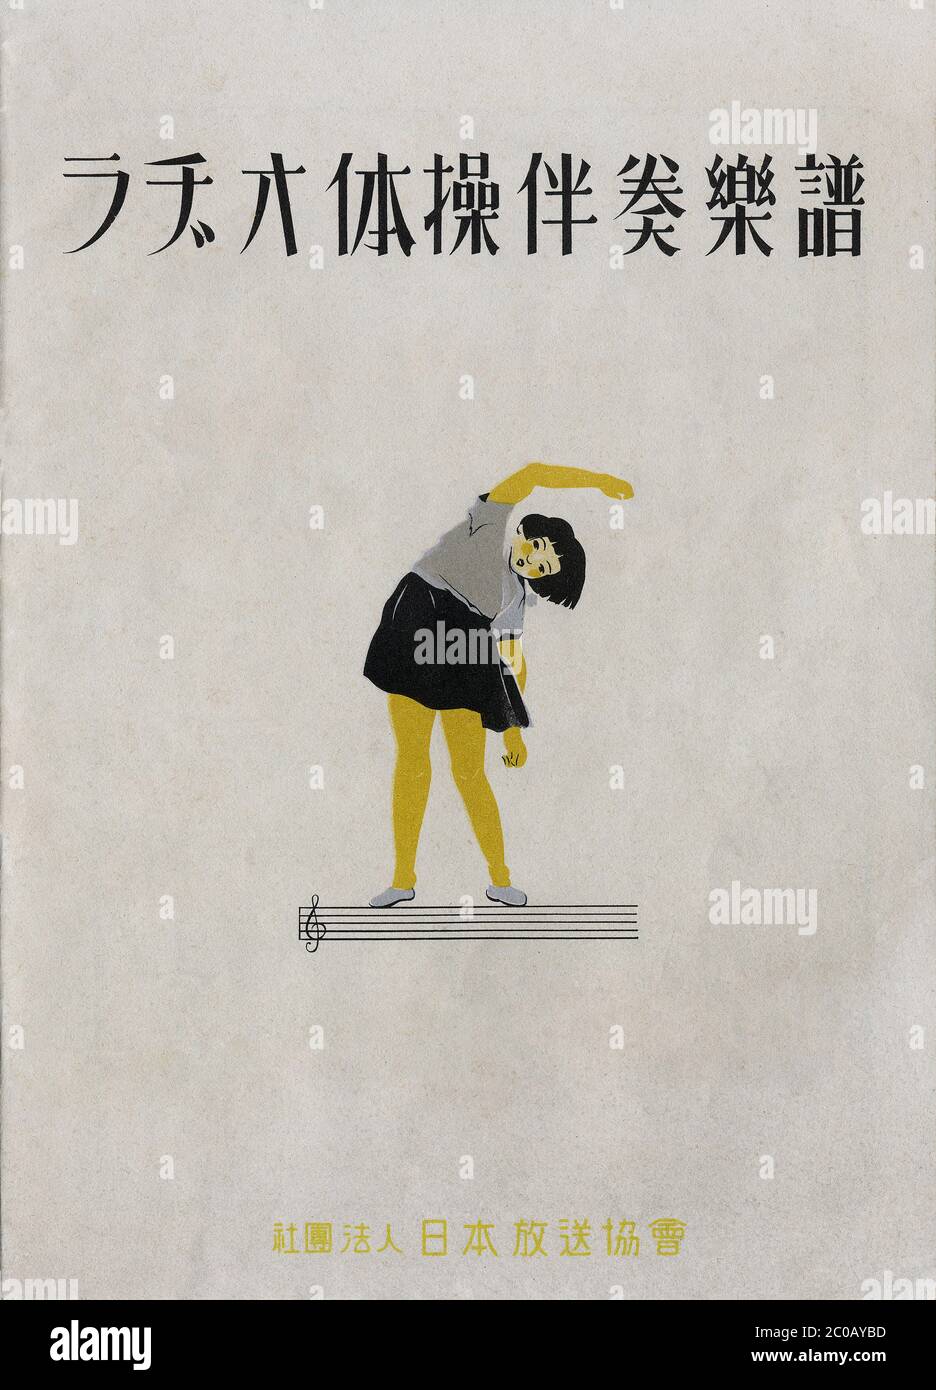 [ 1940s Japan - NHK Radio Calisthenics ] — back cover of a leaflet with sheet music and exercises for  Japanese public broadcaster NHK’s radio calisthenics program (ラジオ体操), published in 1940 (Showa 15 ).  Radio calisthenics were introduced to Japan in 1928 (Showa 3) as a commemoration of the coronation of Emperor Hirohito.  Because of their militaristic nature, the broadcasts were banned by the occupying powers after Japan's defeat in 1945 (Showa 20). They were restarted in 1951 (Showa 26).  20th century vintage flyer. Stock Photo